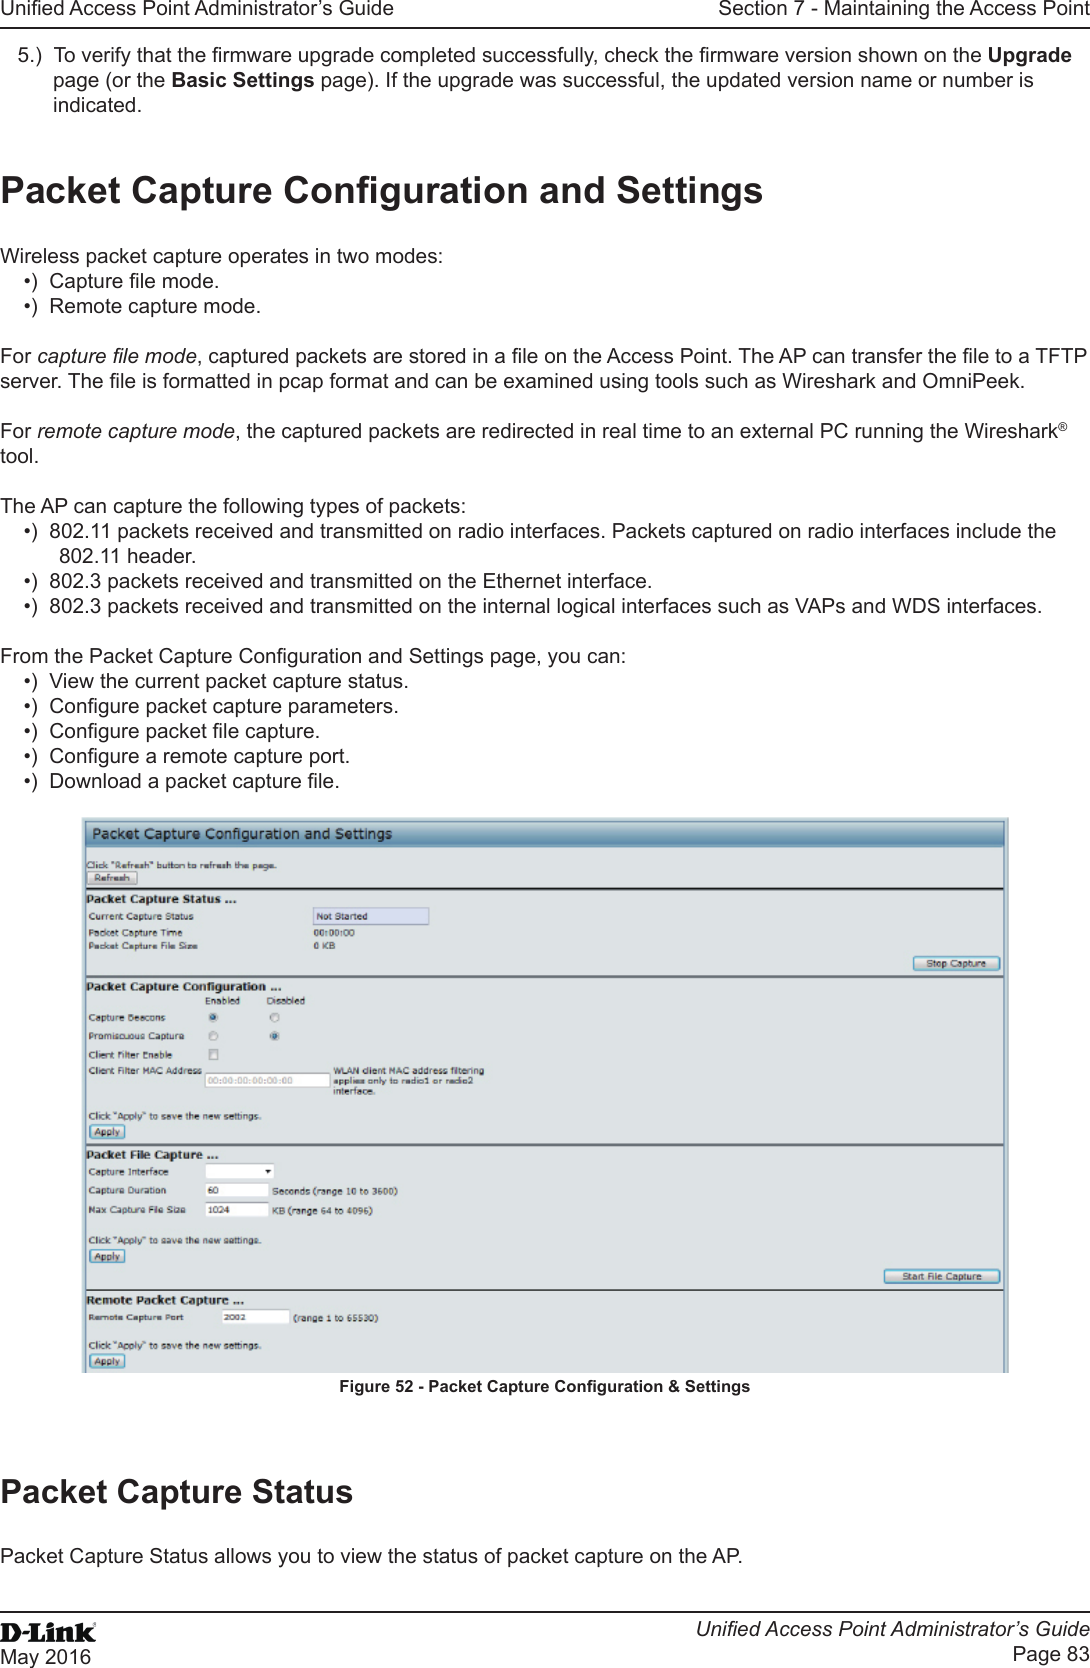 Unied Access Point Administrator’s GuideUnied Access Point Administrator’s GuidePage 83May 2016Section 7 - Maintaining the Access Point5.)  To verify that the rmware upgrade completed successfully, check the rmware version shown on the Upgrade page (or the Basic Settings page). If the upgrade was successful, the updated version name or number is indicated.Packet Capture Conguration and SettingsWireless packet capture operates in two modes:•)  Capture le mode.•)  Remote capture mode.For capture le mode, captured packets are stored in a le on the Access Point. The AP can transfer the le to a TFTP server. The le is formatted in pcap format and can be examined using tools such as Wireshark and OmniPeek.For remote capture mode, the captured packets are redirected in real time to an external PC running the Wireshark® tool.The AP can capture the following types of packets:•)  802.11 packets received and transmitted on radio interfaces. Packets captured on radio interfaces include the 802.11 header.•)  802.3 packets received and transmitted on the Ethernet interface.•)  802.3 packets received and transmitted on the internal logical interfaces such as VAPs and WDS interfaces.From the Packet Capture Conguration and Settings page, you can:•)  View the current packet capture status.•)  Congure packet capture parameters.•)  Congure packet le capture.•)  Congure a remote capture port.•)  Download a packet capture le.Figure 52 - Packet Capture Conguration &amp; SettingsPacket Capture StatusPacket Capture Status allows you to view the status of packet capture on the AP.